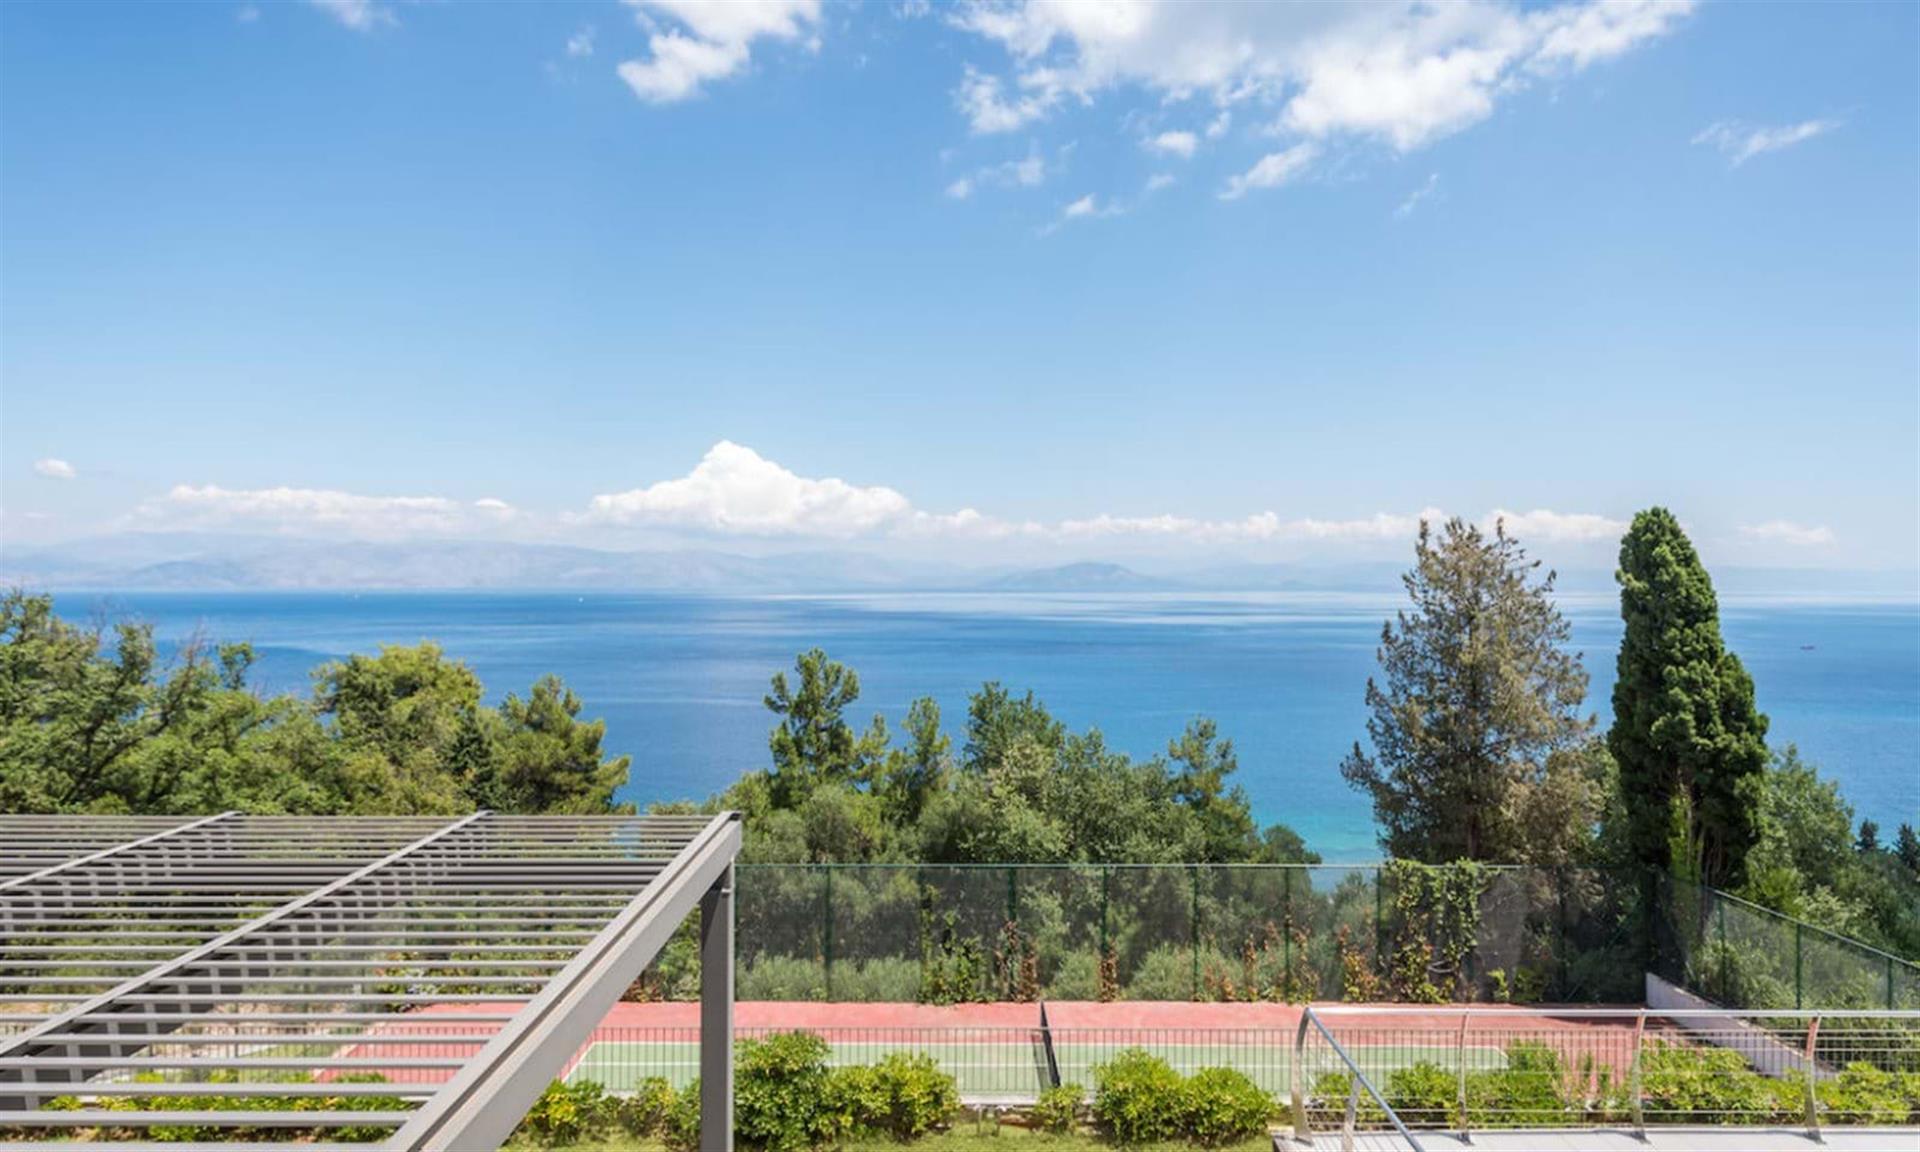 Stunning 5 bedroom Villa in a great location near the Achilleon Palace, convenient for Corfu Town, t